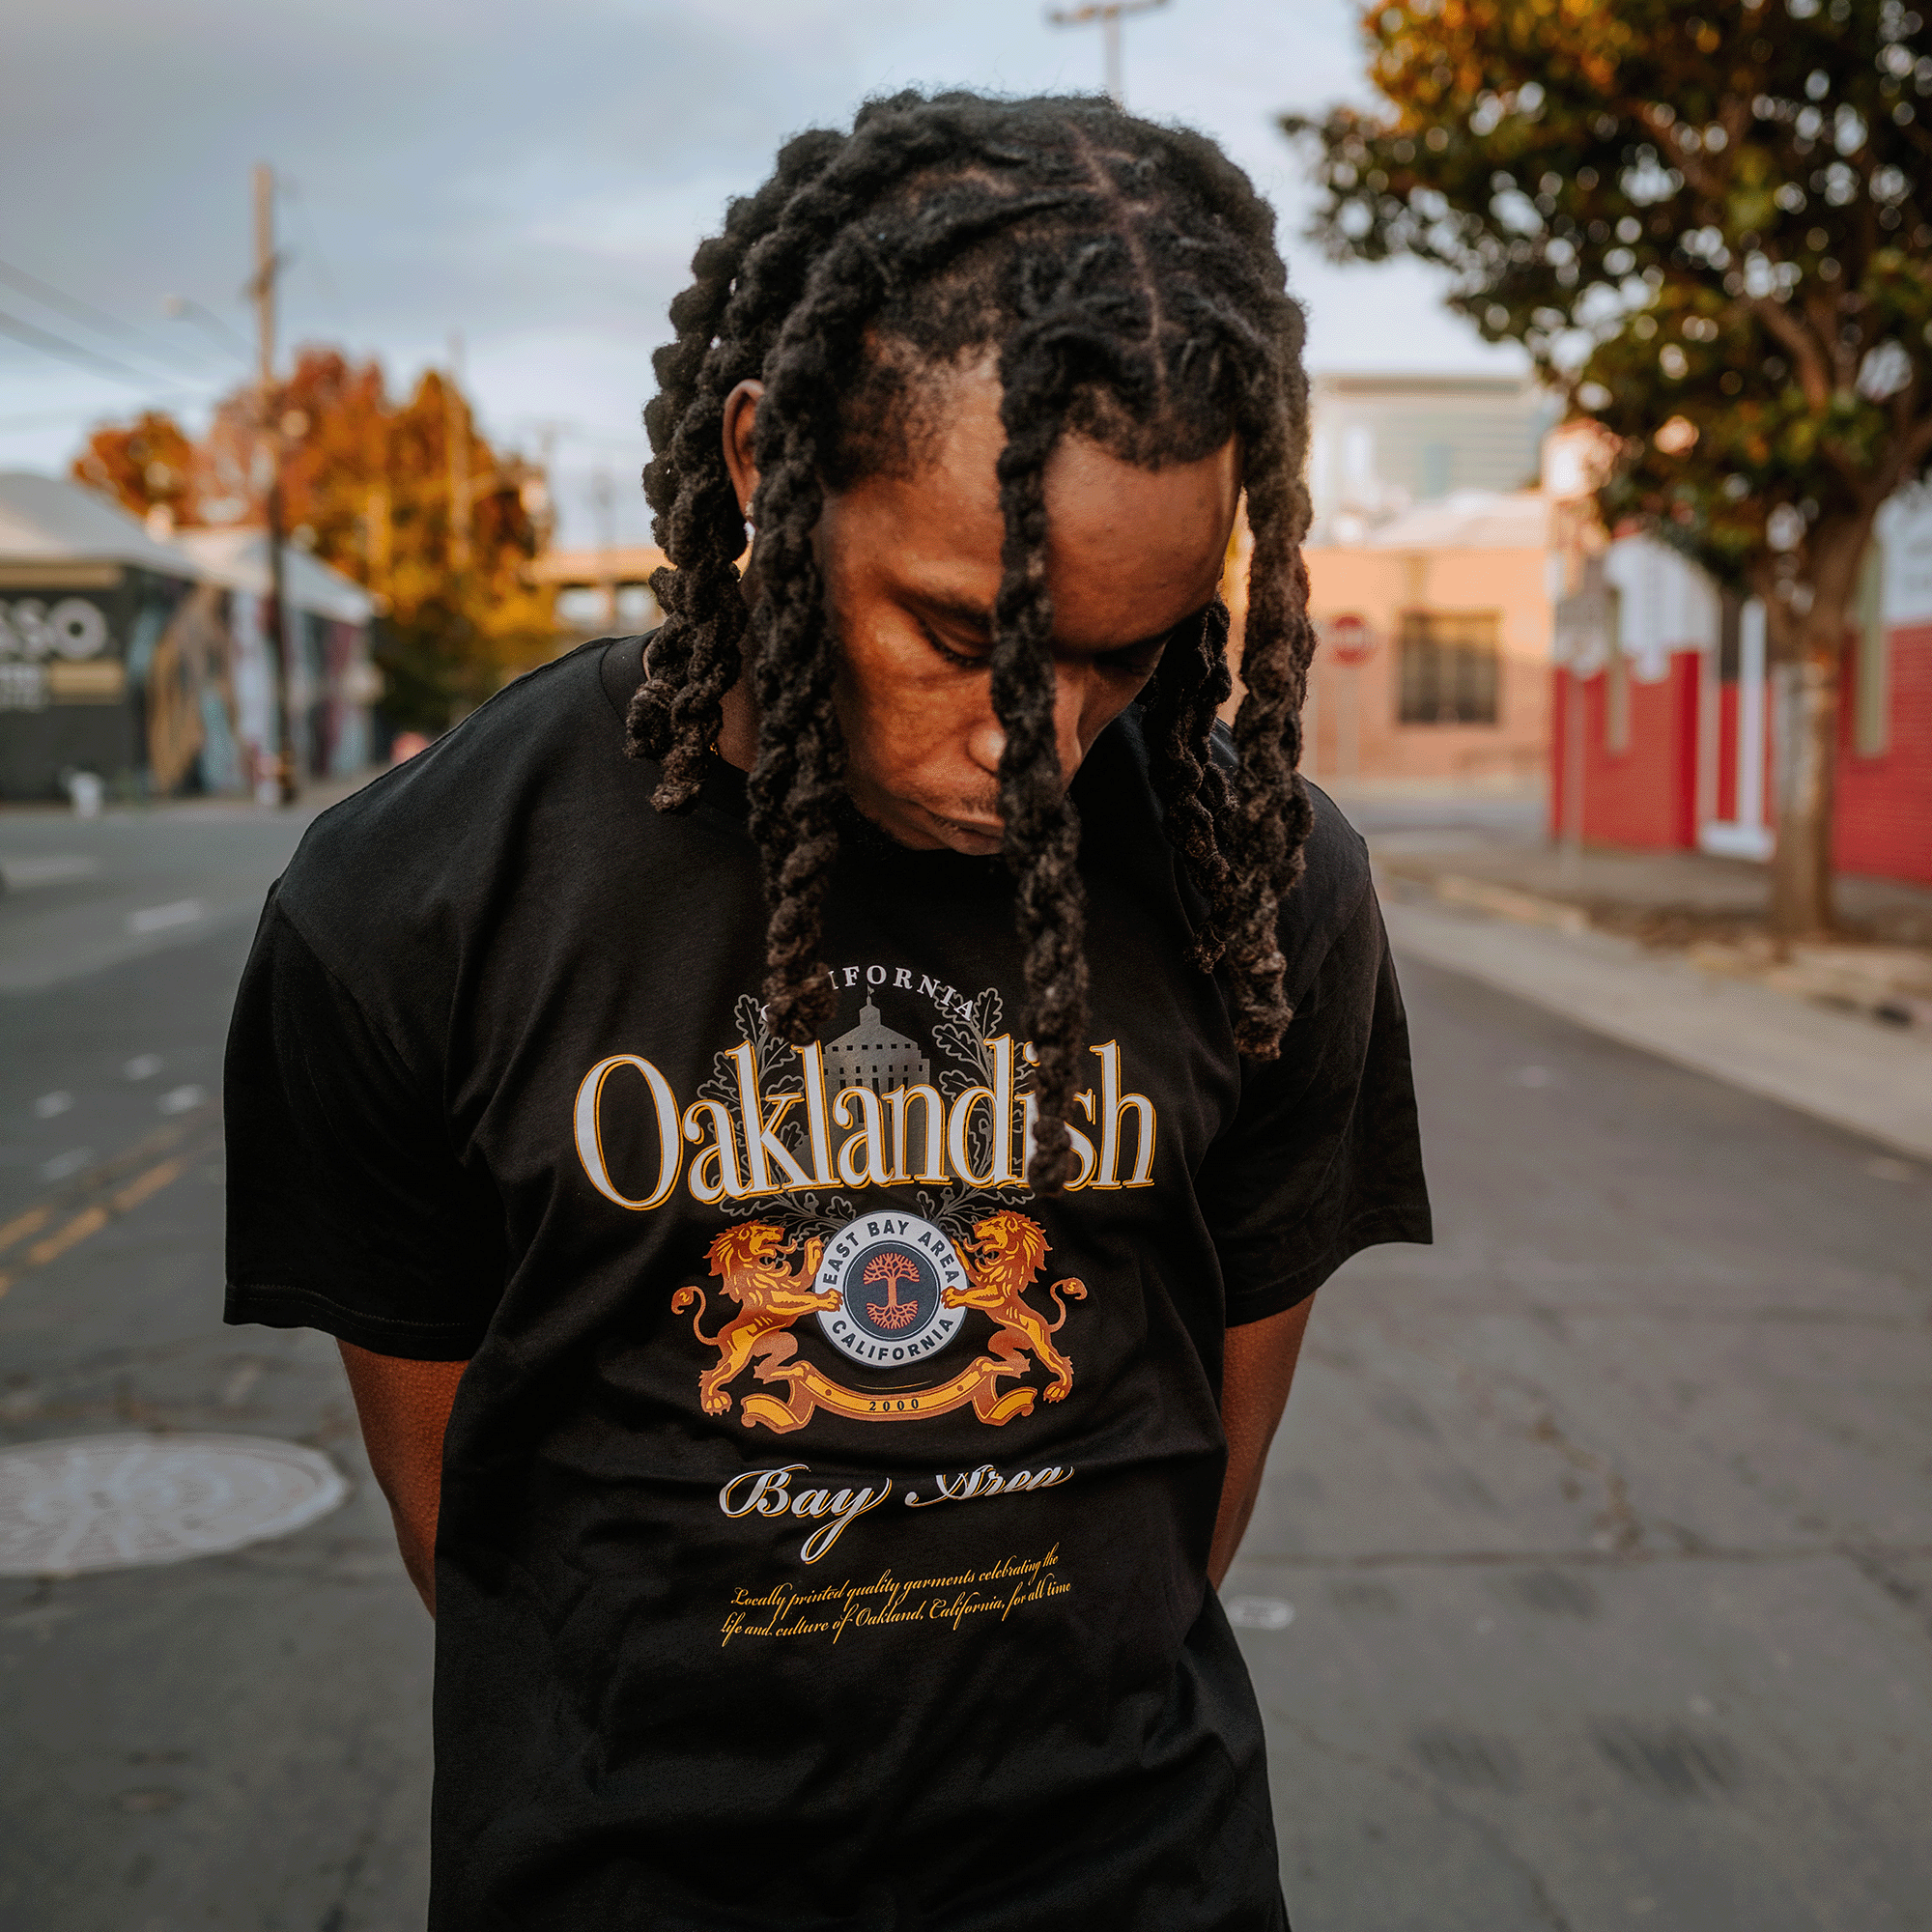 Model wearing a black t-shirt with Lager Negra logo made over with a Bay Area, Oaklandish, California styling.